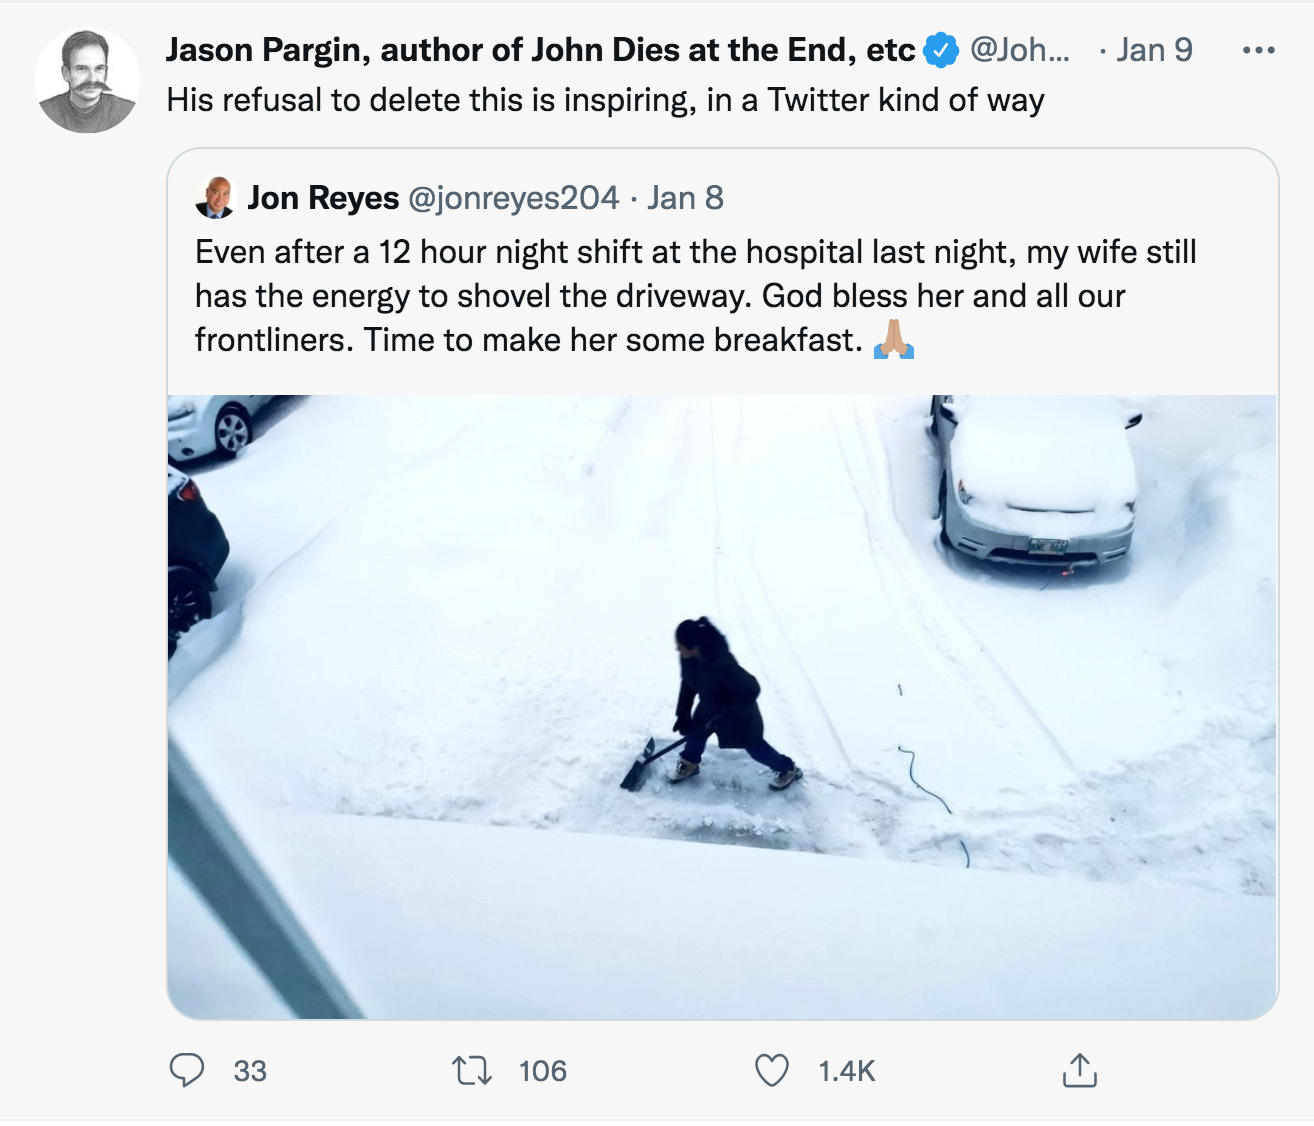 Husband Roasts For Snow Shoveling Tweet - snow - . Jan 9 . Jason Pargin, author of John Dies at the End, etc ... His refusal to delete this is inspiring, in a Twitter kind of way Jon Reyes . Jan 8 Even after a 12 hour night shift at the hospital last nigh